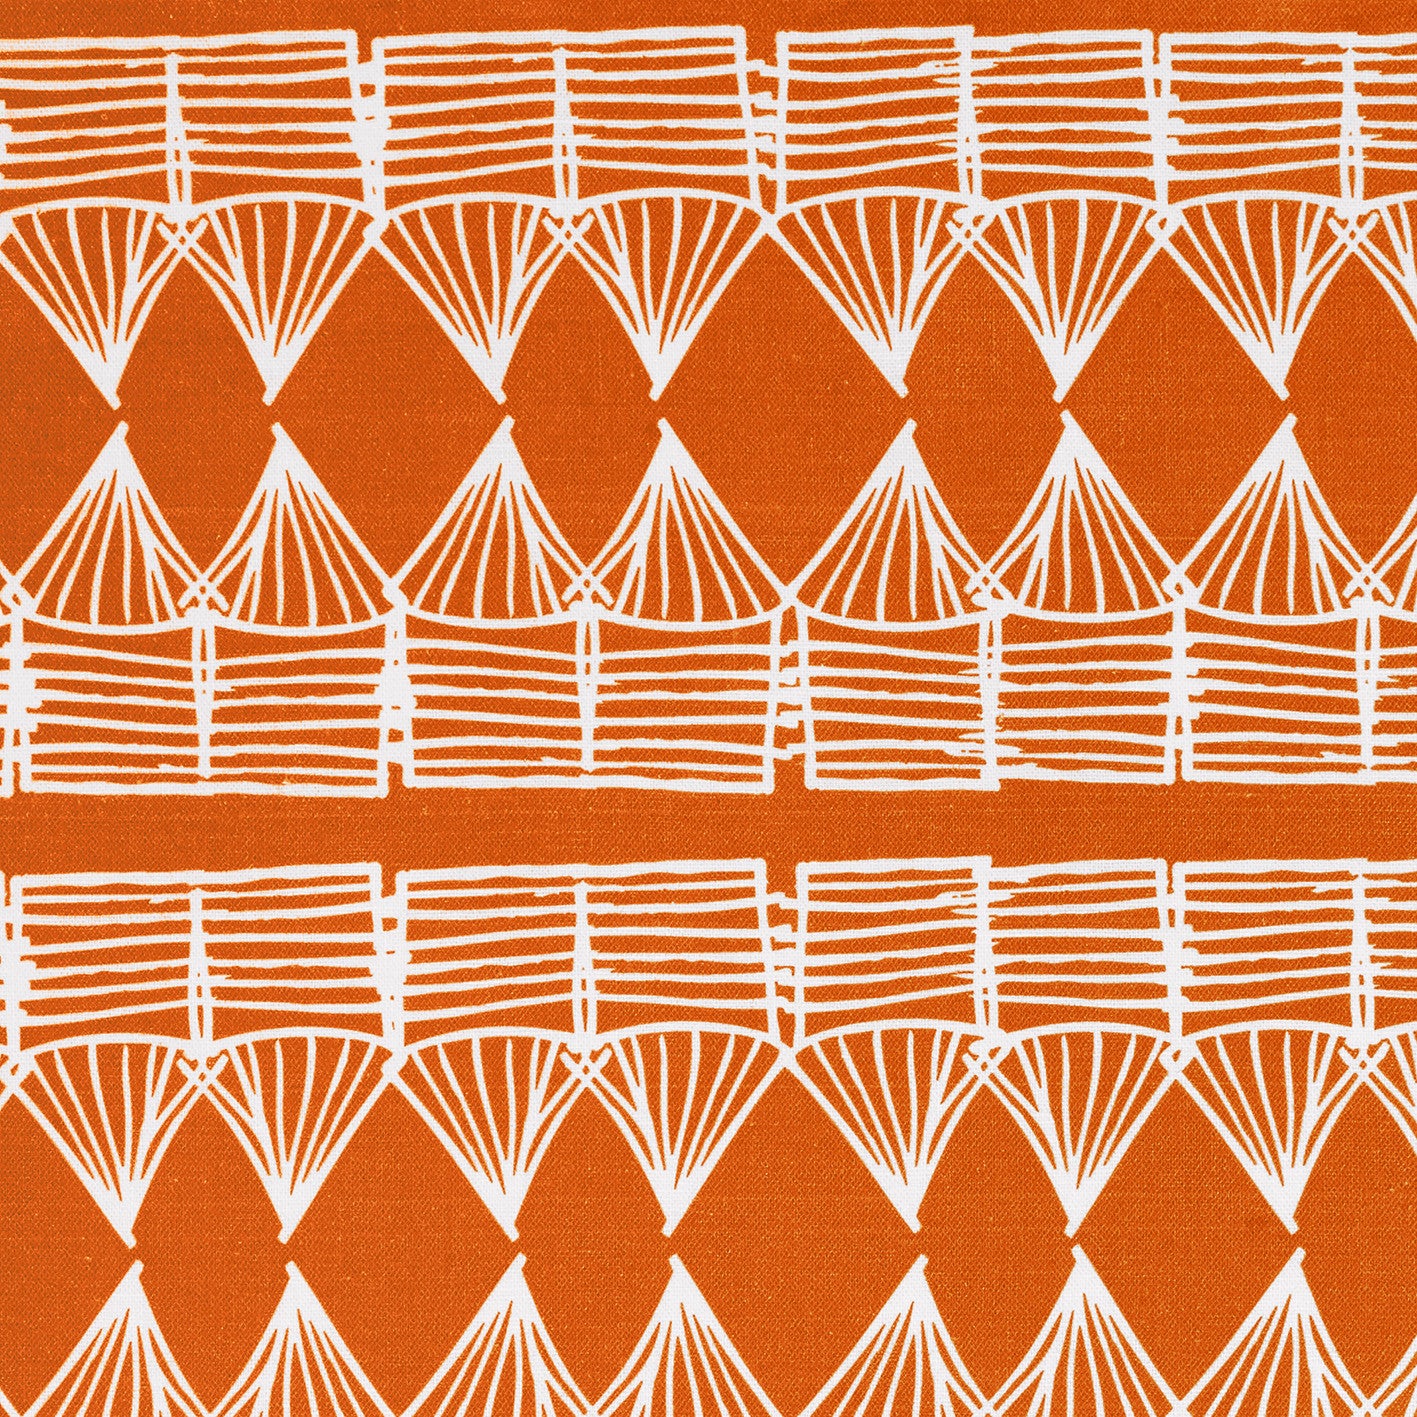 Tiki Huts Pattern Cotton Linen Home Decor Fabric by the meter or by the yard for curtains, blinds, upholstery in Bright Pumpkin Orange ships from Canada (USA)